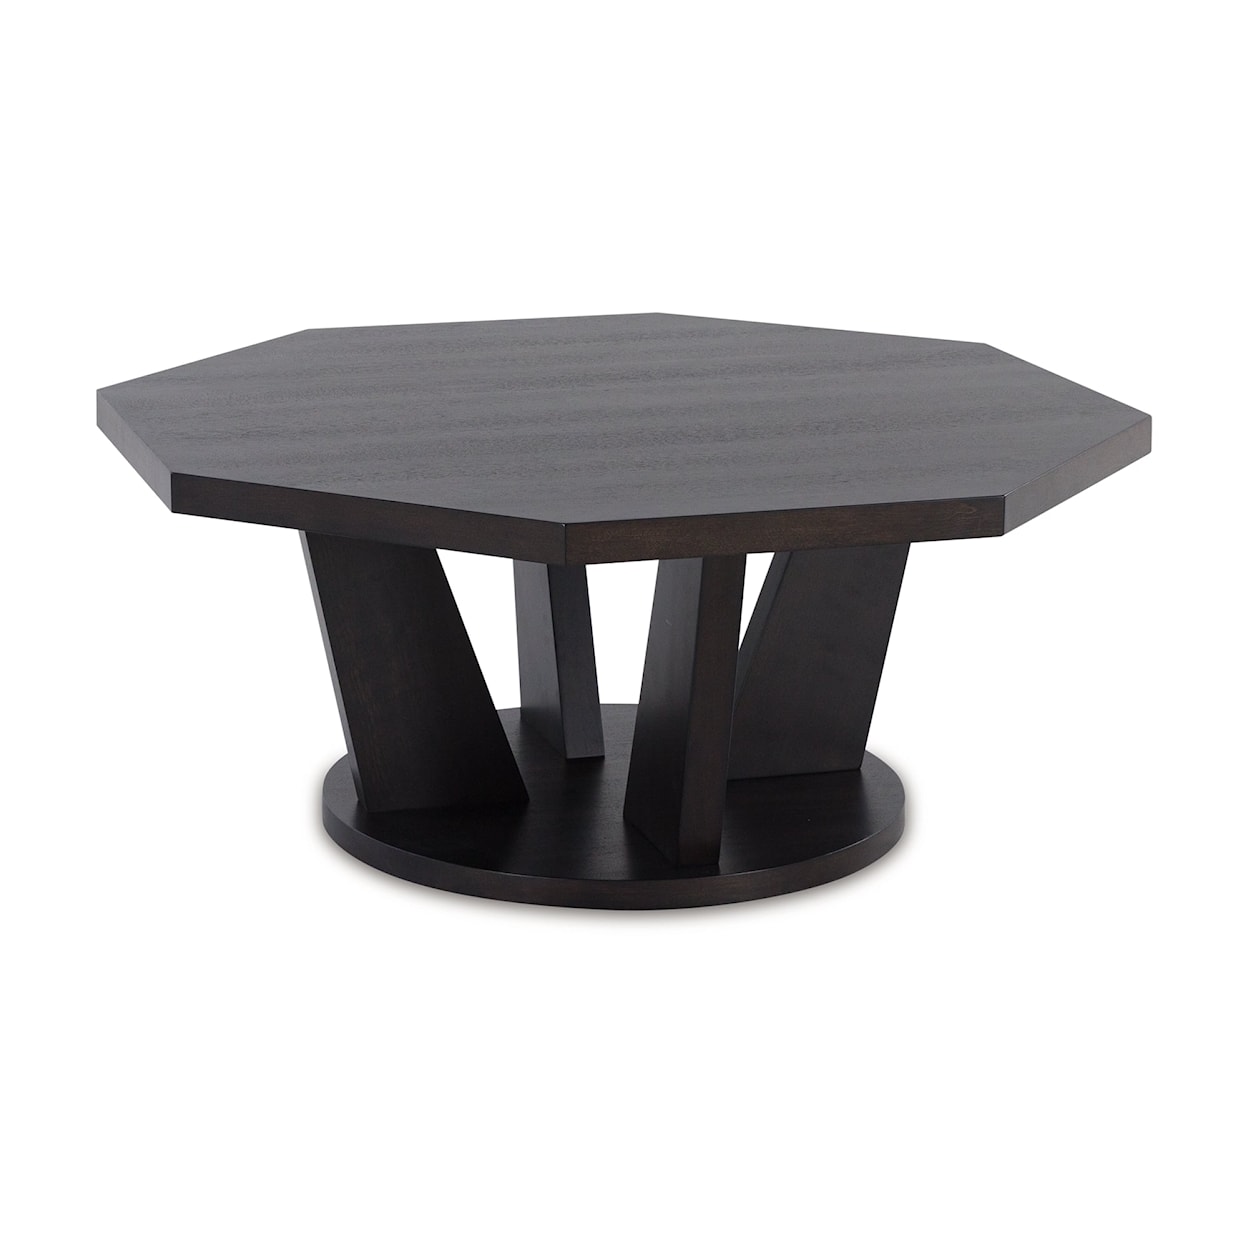 Signature Design Chasinfield Octagon Cocktail Table